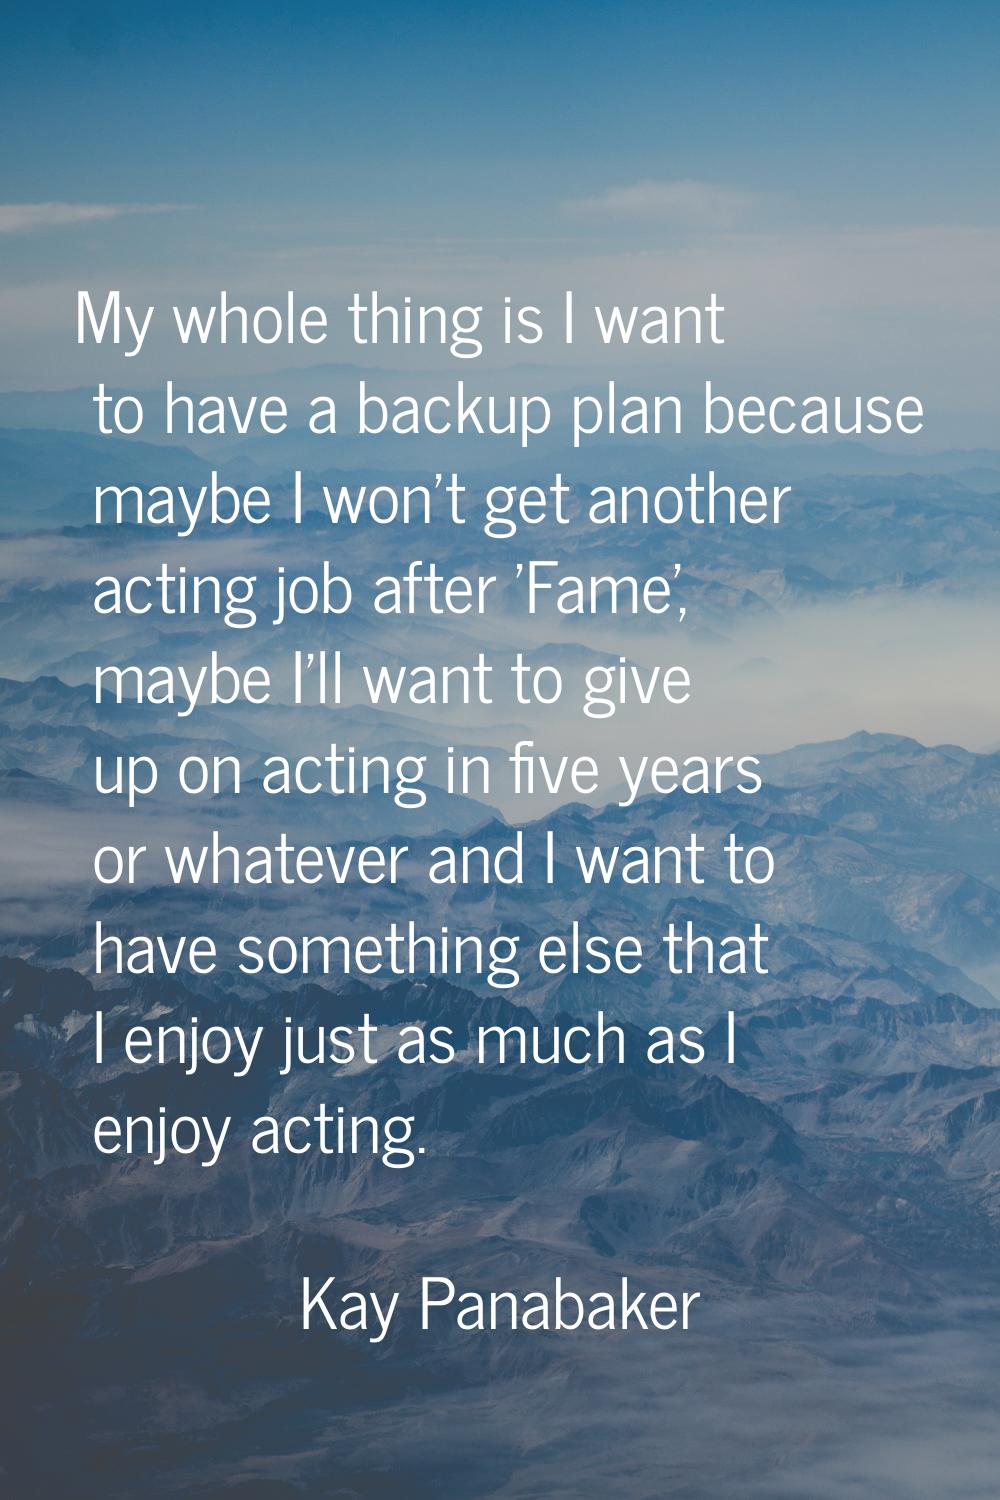 My whole thing is I want to have a backup plan because maybe I won't get another acting job after '